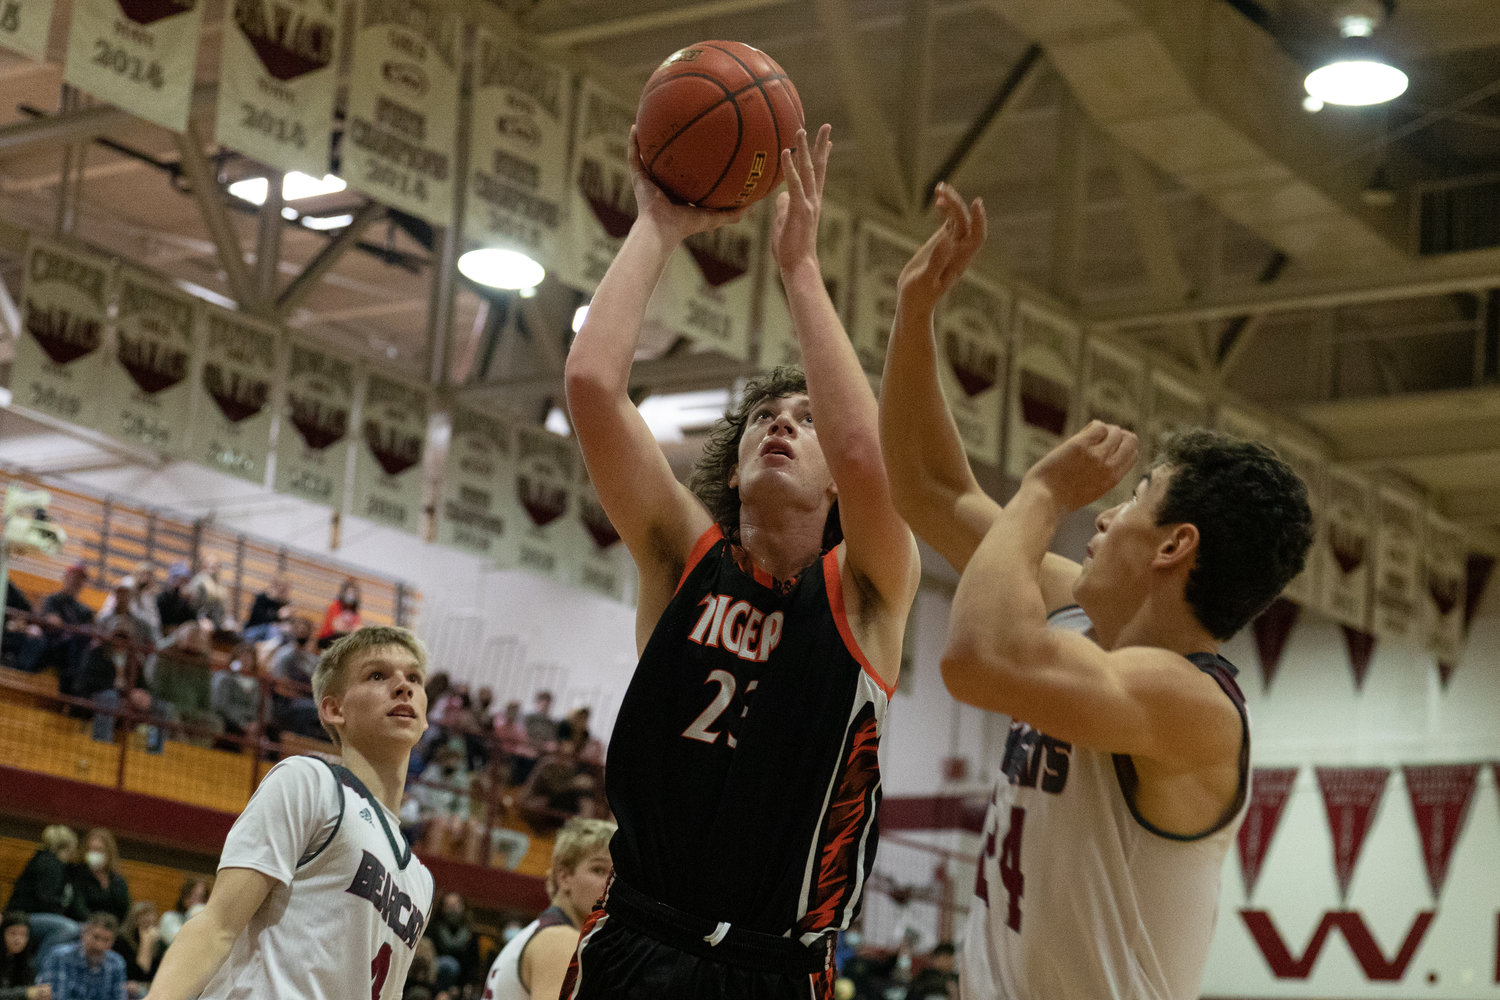 Centralia's Cole Wasson drives for a layup against W.F. West Jan. 5.